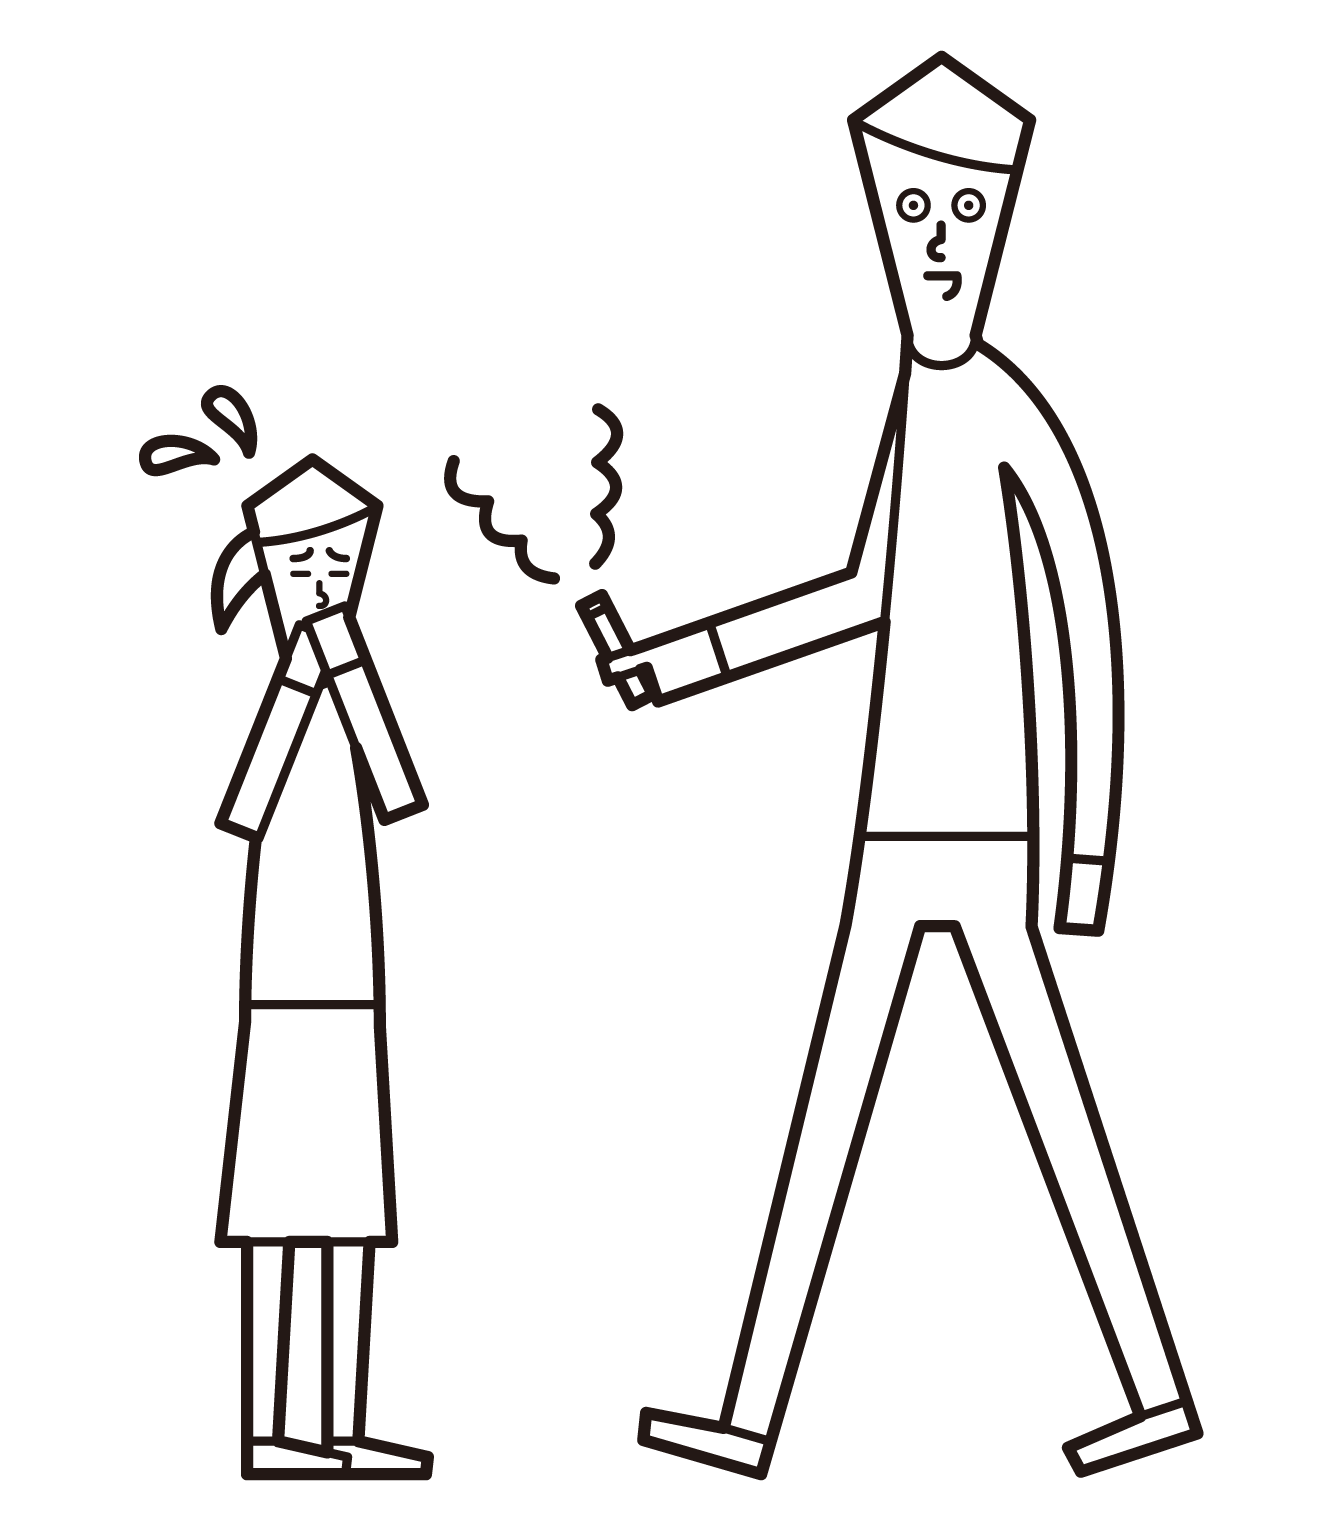 Illustration of a man smoking a cigarette while walking